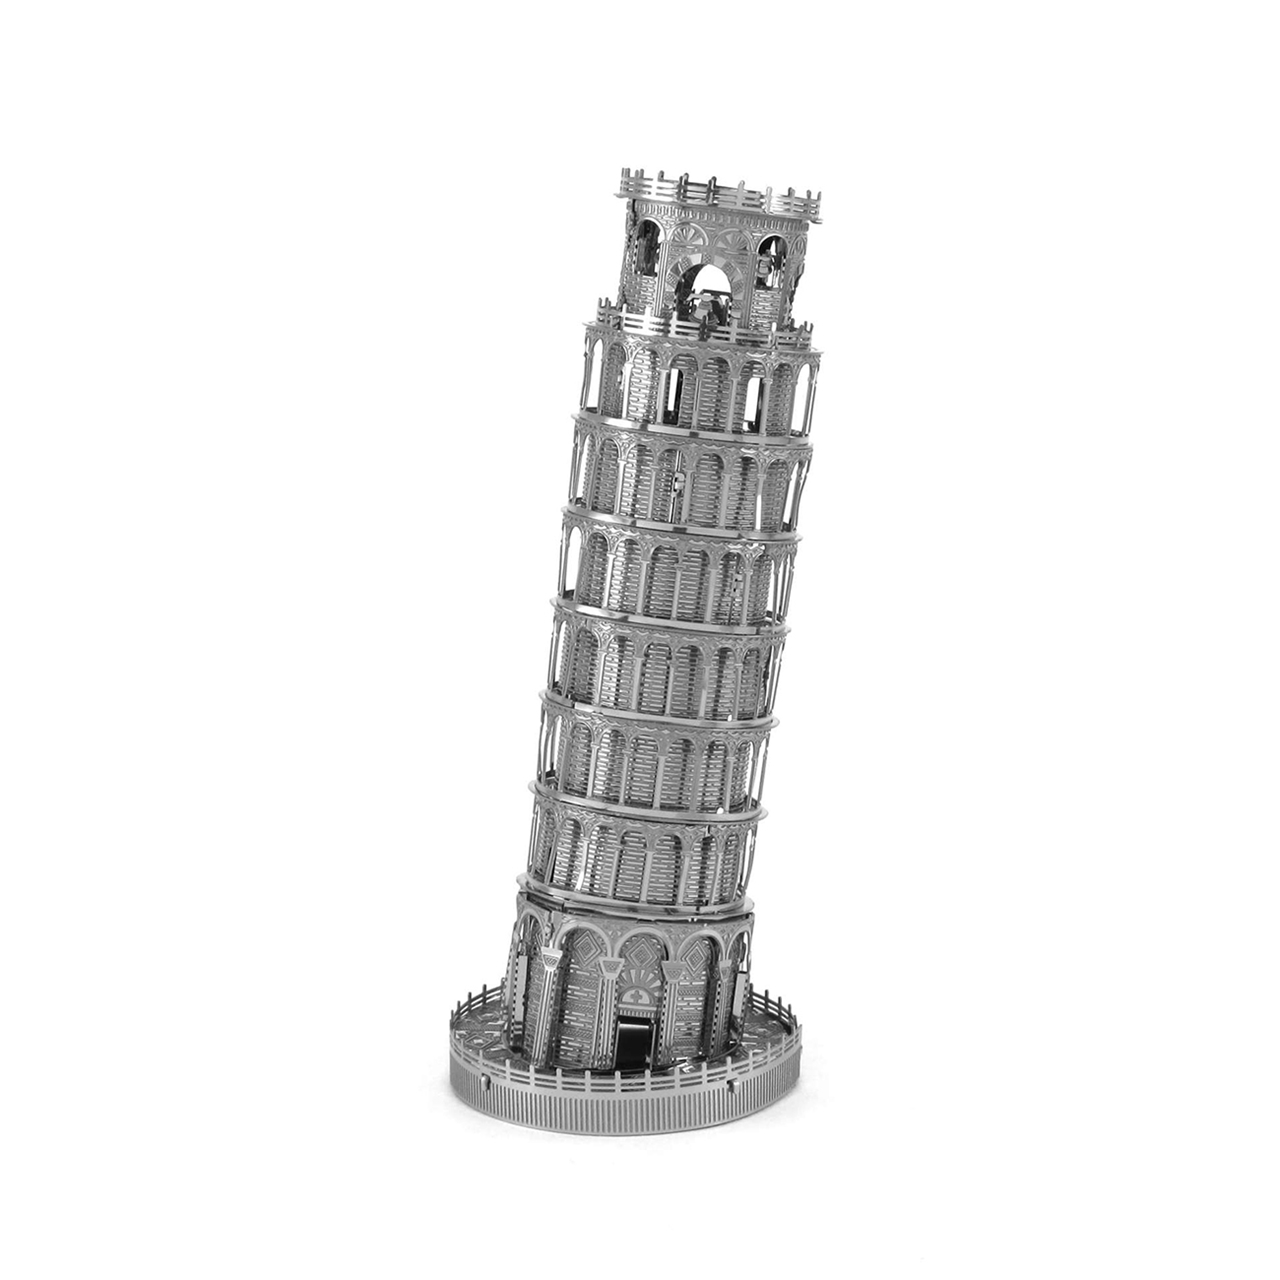 Fascinations Metal Earth ICONX 3d Laser Cut Model Sears Tower ICX013 for sale online